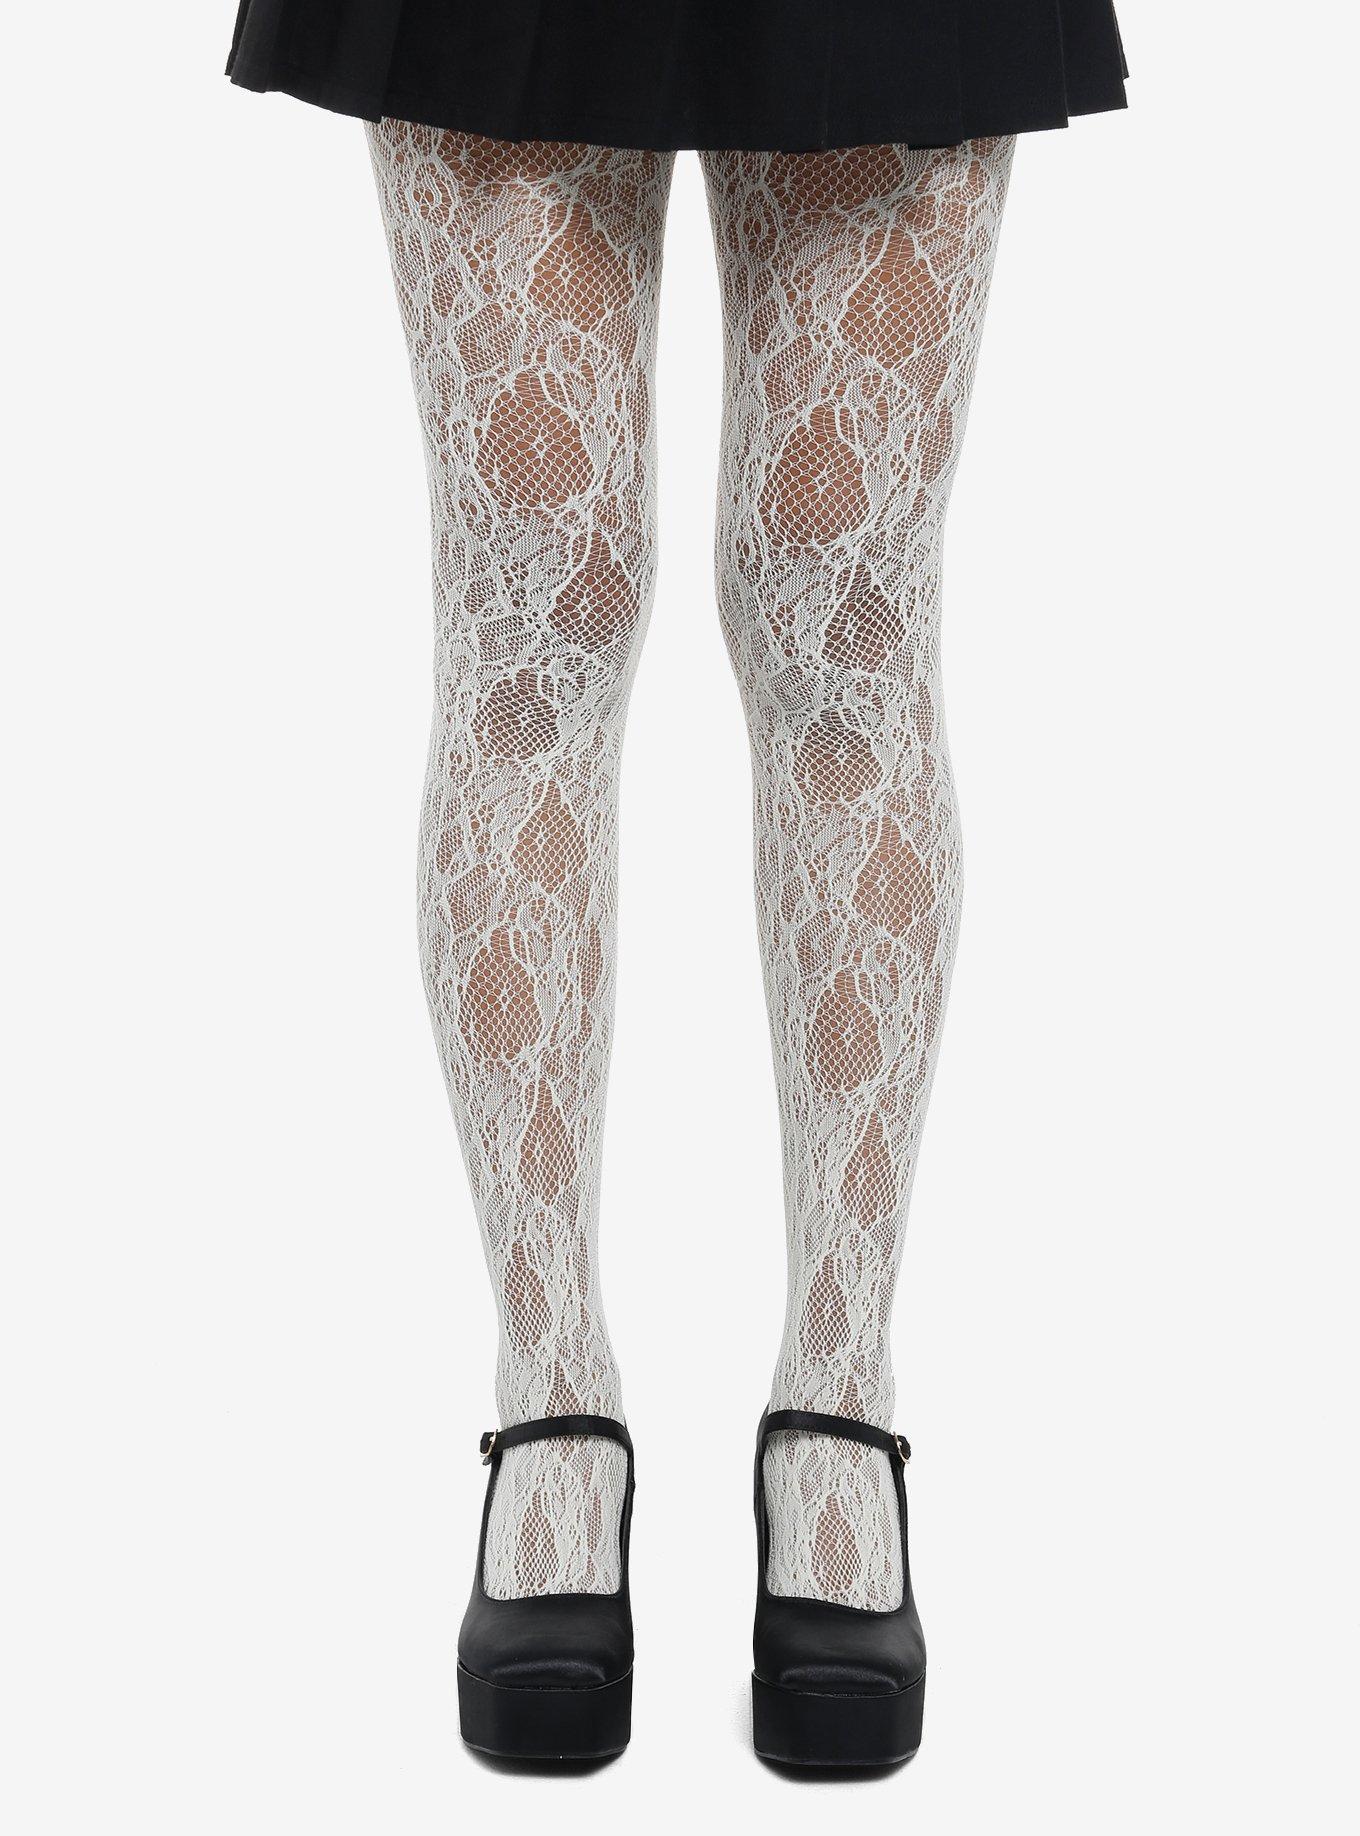 Breathable & Anti-Bacterial floral lace stockings 